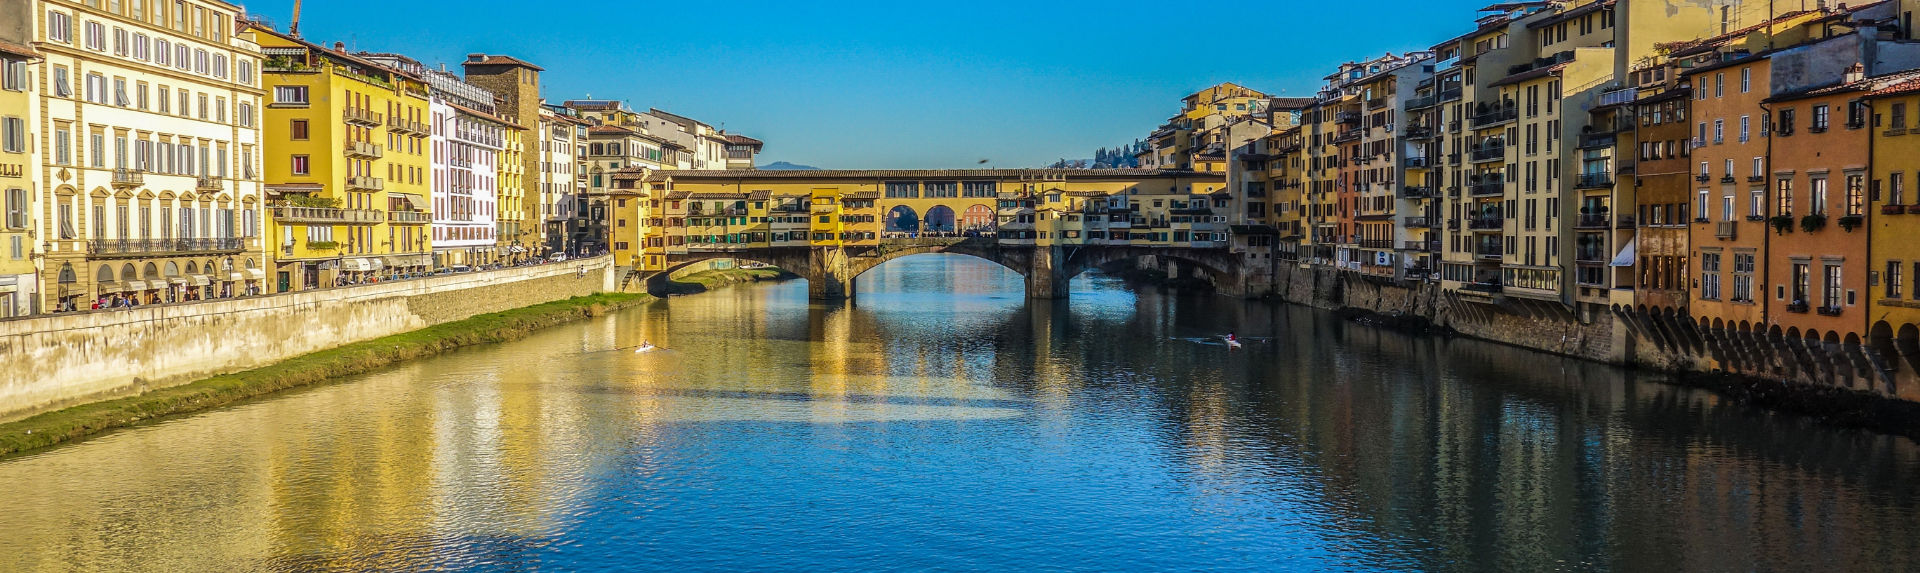 5 things to do in Florence